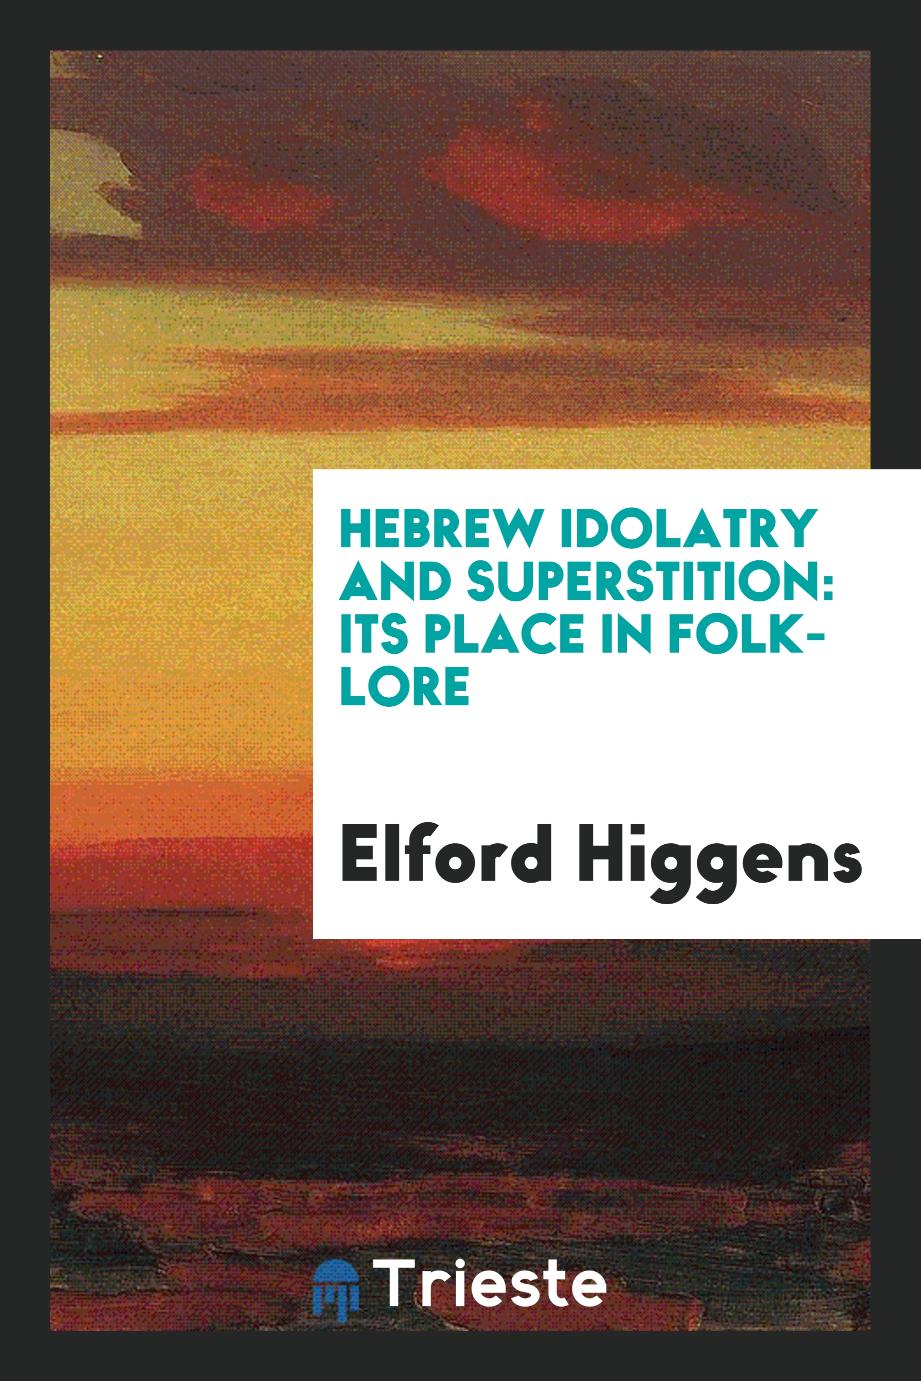 Hebrew Idolatry and Superstition: Its Place in Folk-Lore